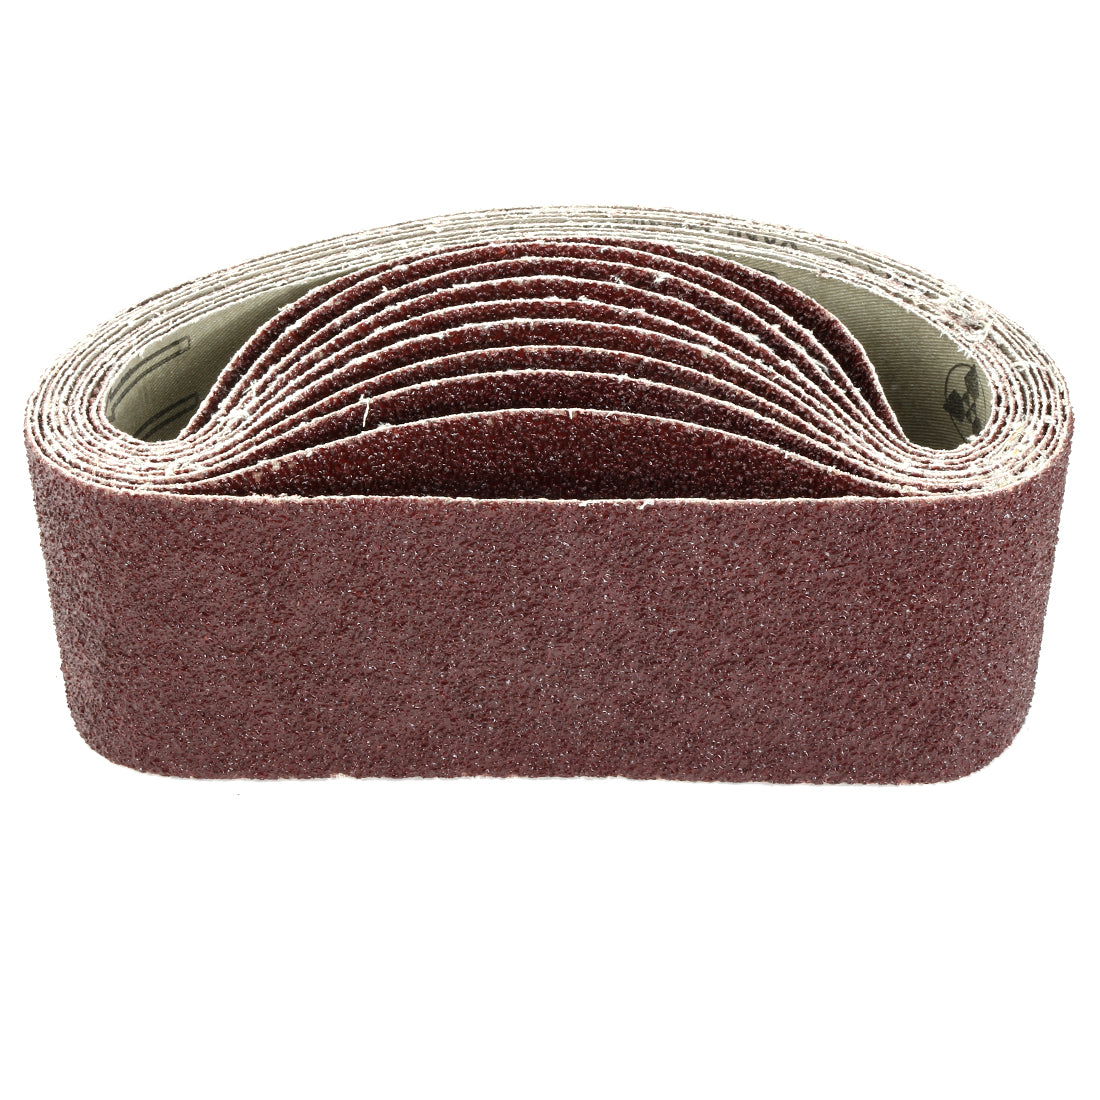 uxcell Uxcell 3-Inch x 21-Inch Aluminum Oxide Sanding Belt 36 Grits Lapped Joint 10pcs